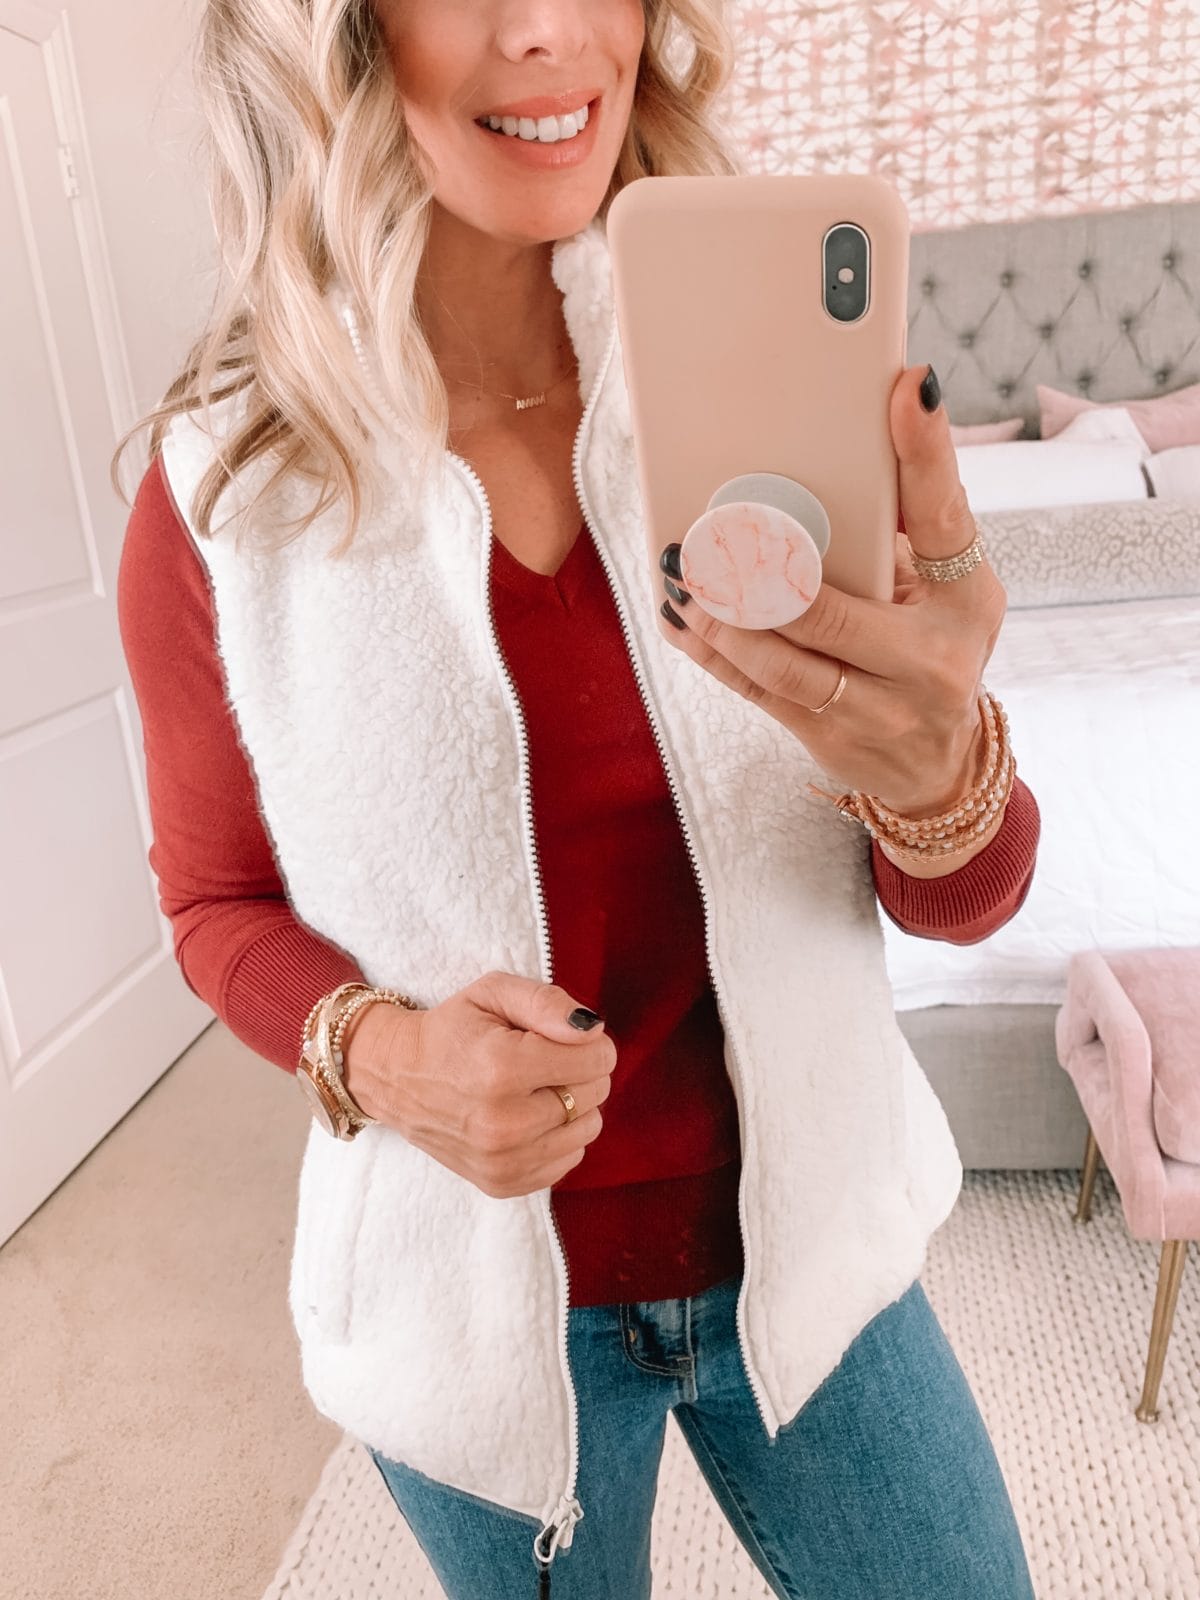 Amazon Fashion Faves, Fleece Vest, Red Long Sleeve Top, Jeans